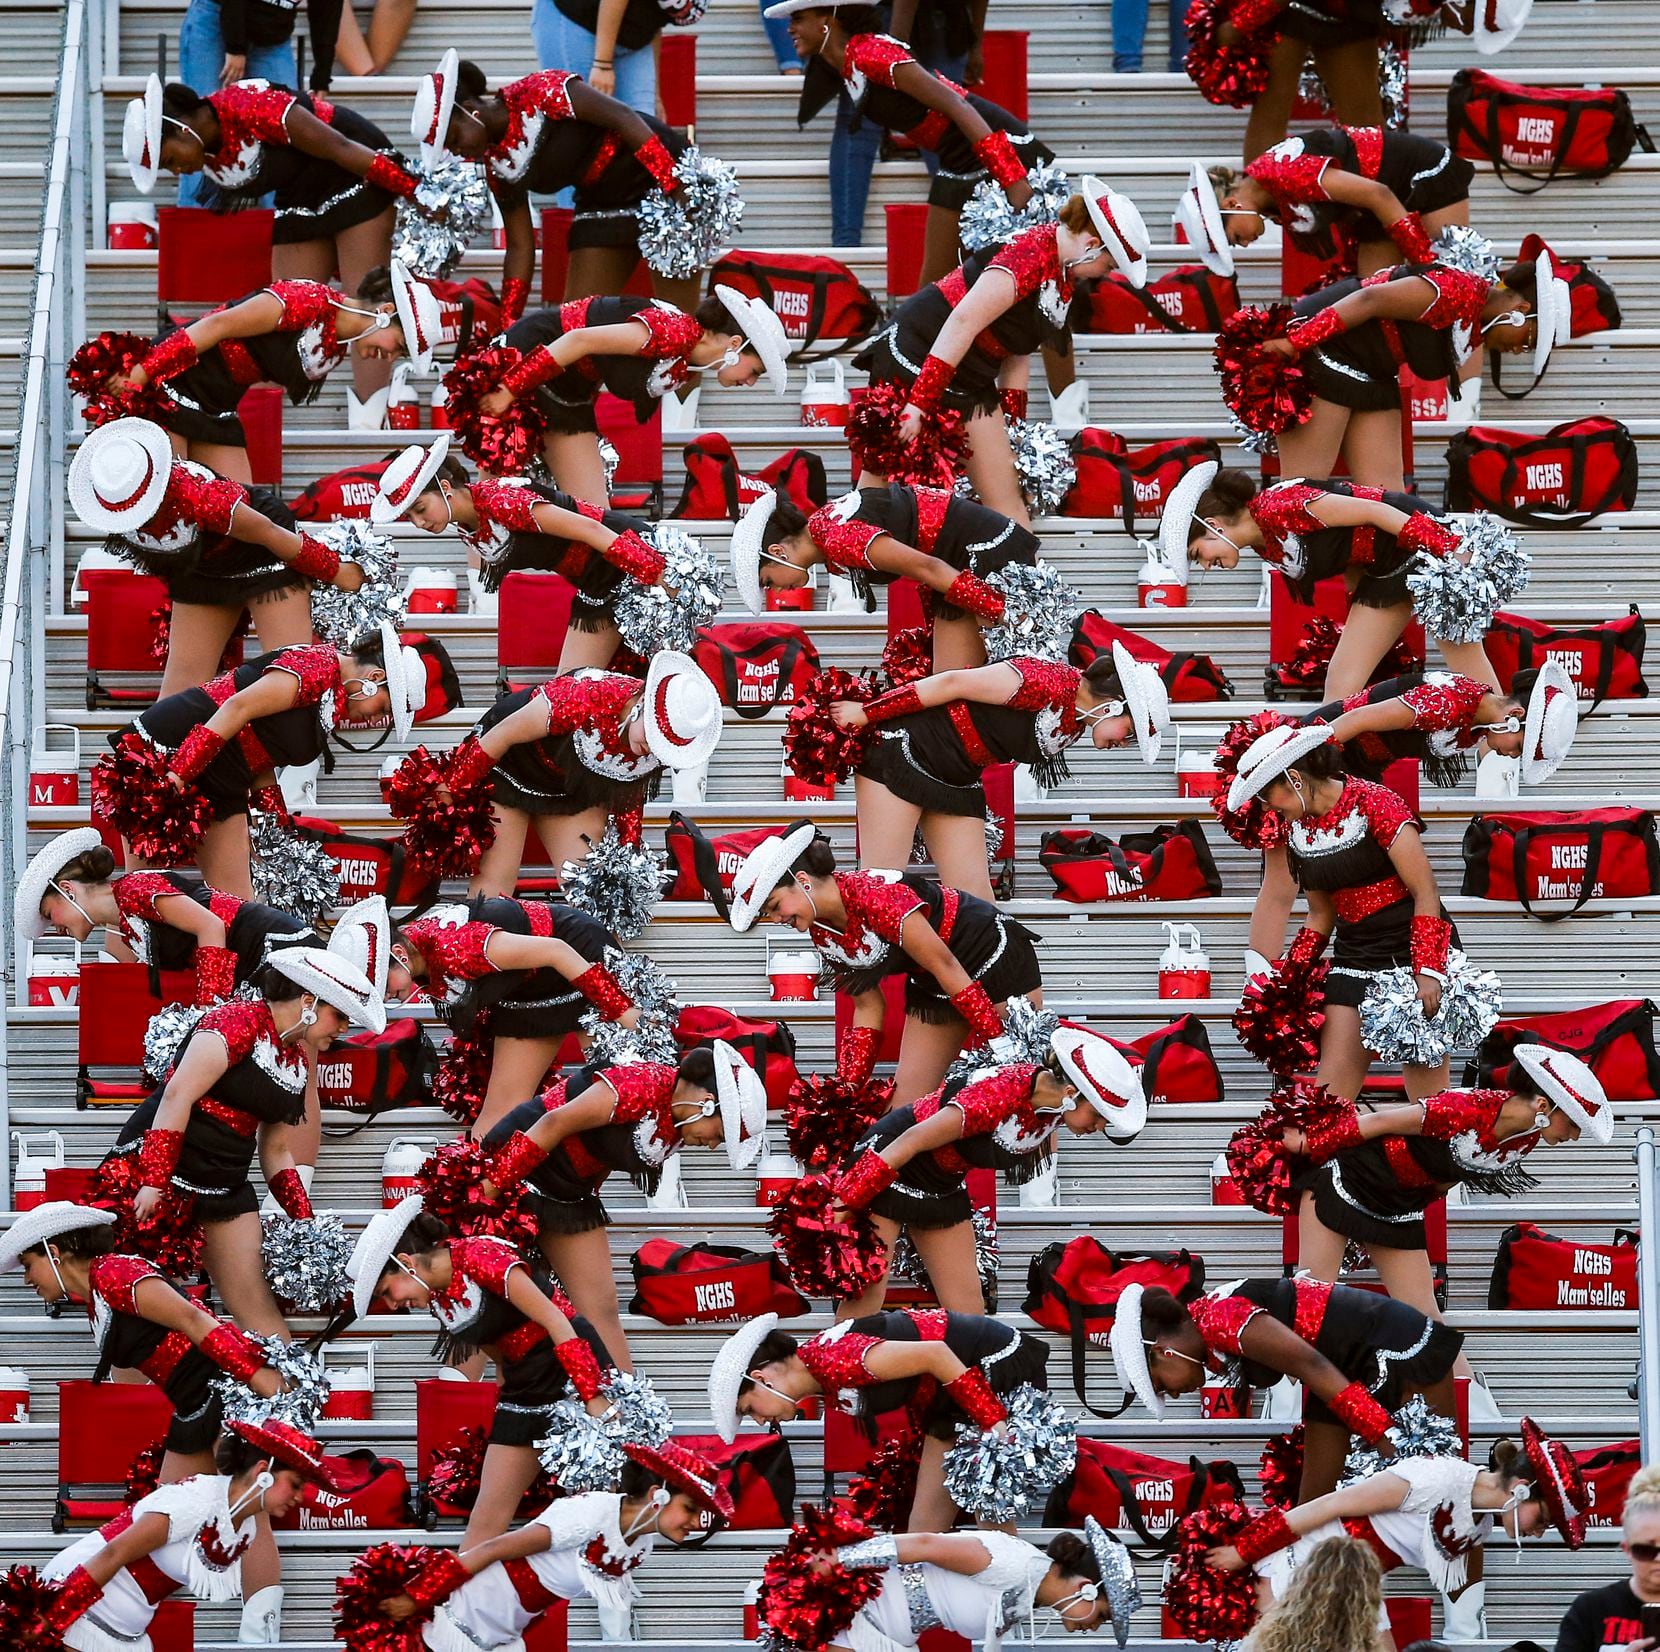 North Garland High School’s Mam’selles drill team performed in the stands during a game at...